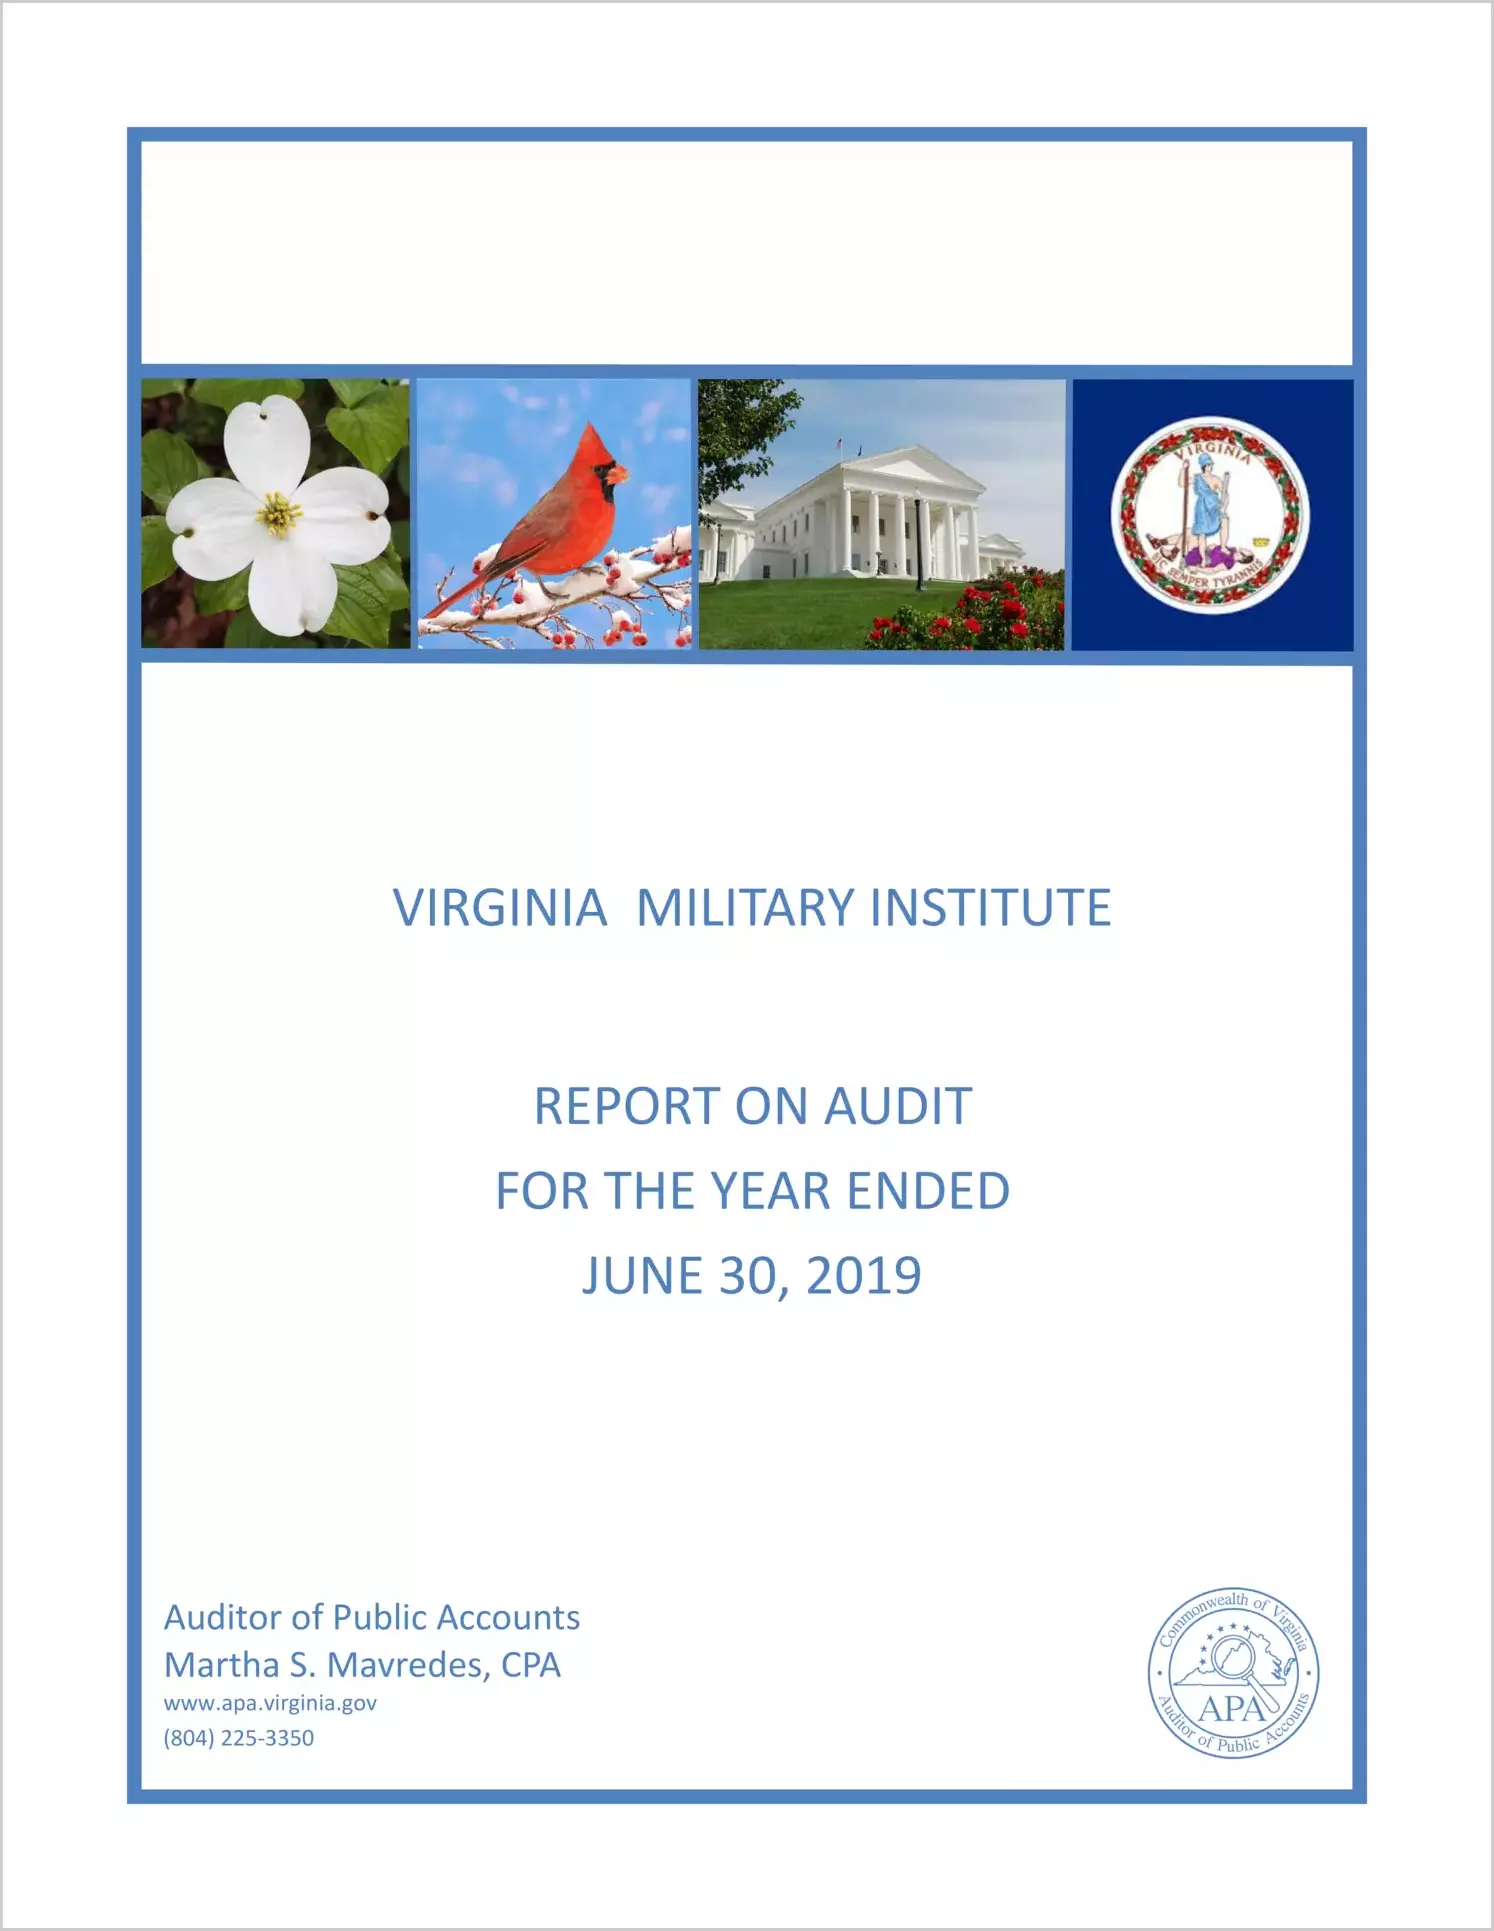 Virginia Military Institute for the year ended June 30, 2019